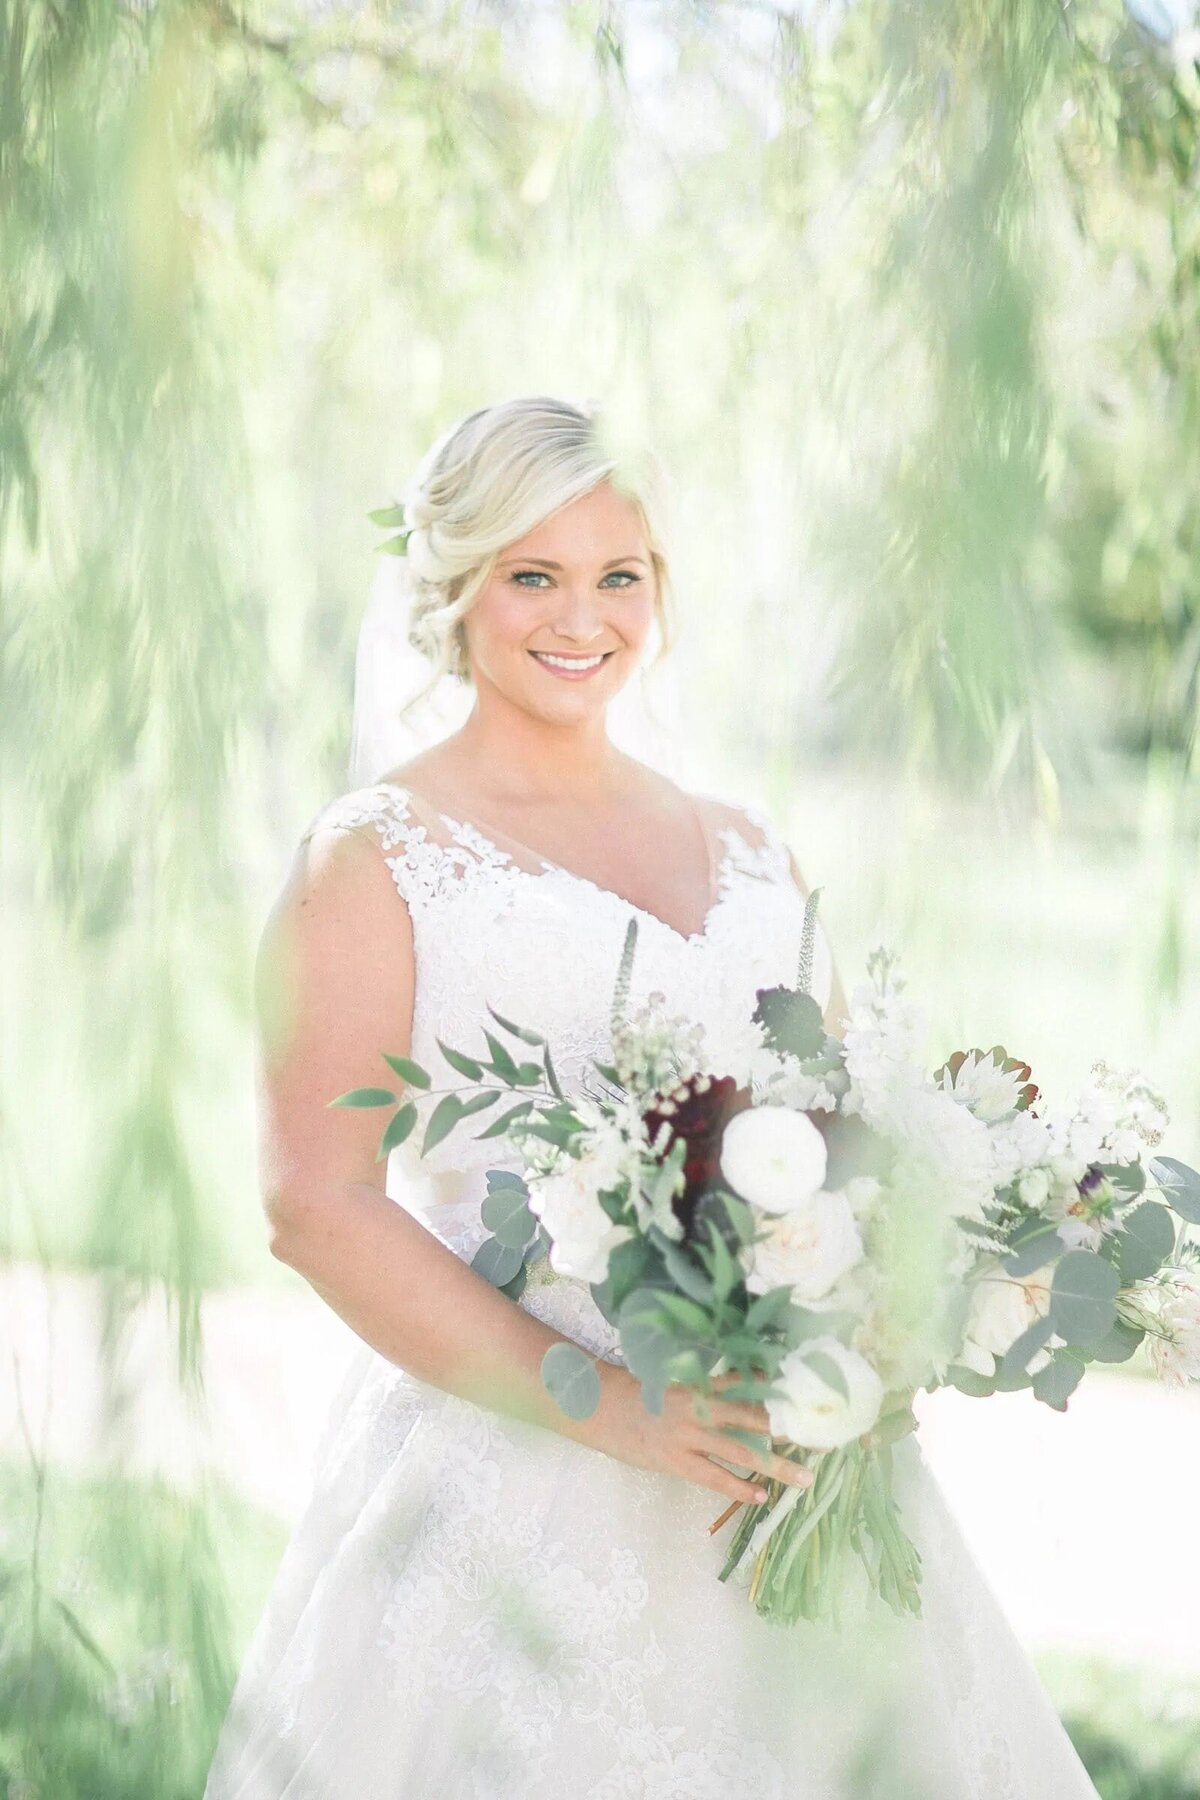 A bride smiling and holding a bouquet of flowers